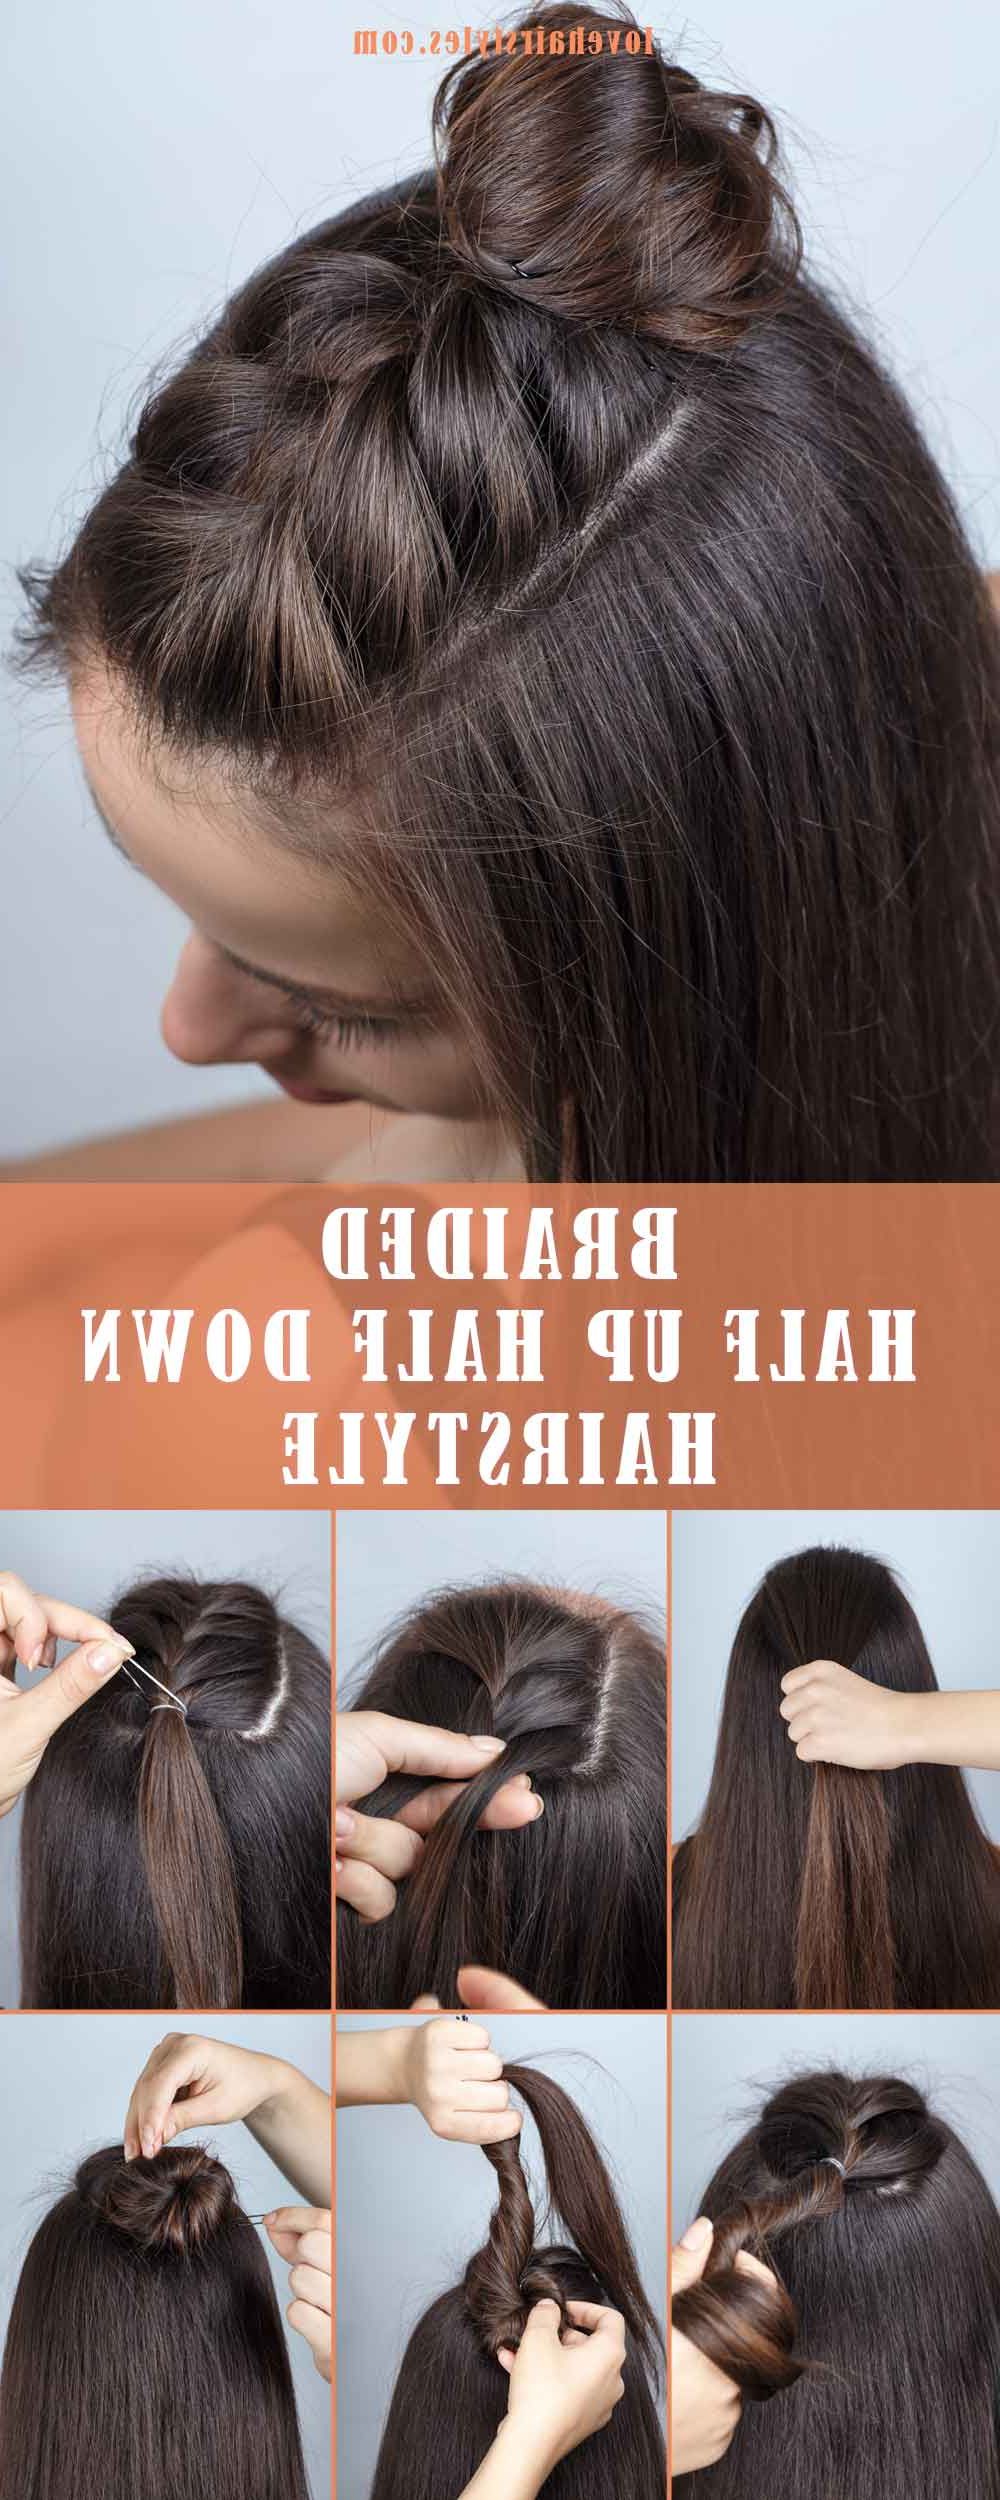 15 Perfectly Easy Hairstyles For Medium Hair – Love Hairstyles With Regard To Most Up To Date Easy Hairstyles For Medium Length Hair (View 11 of 20)